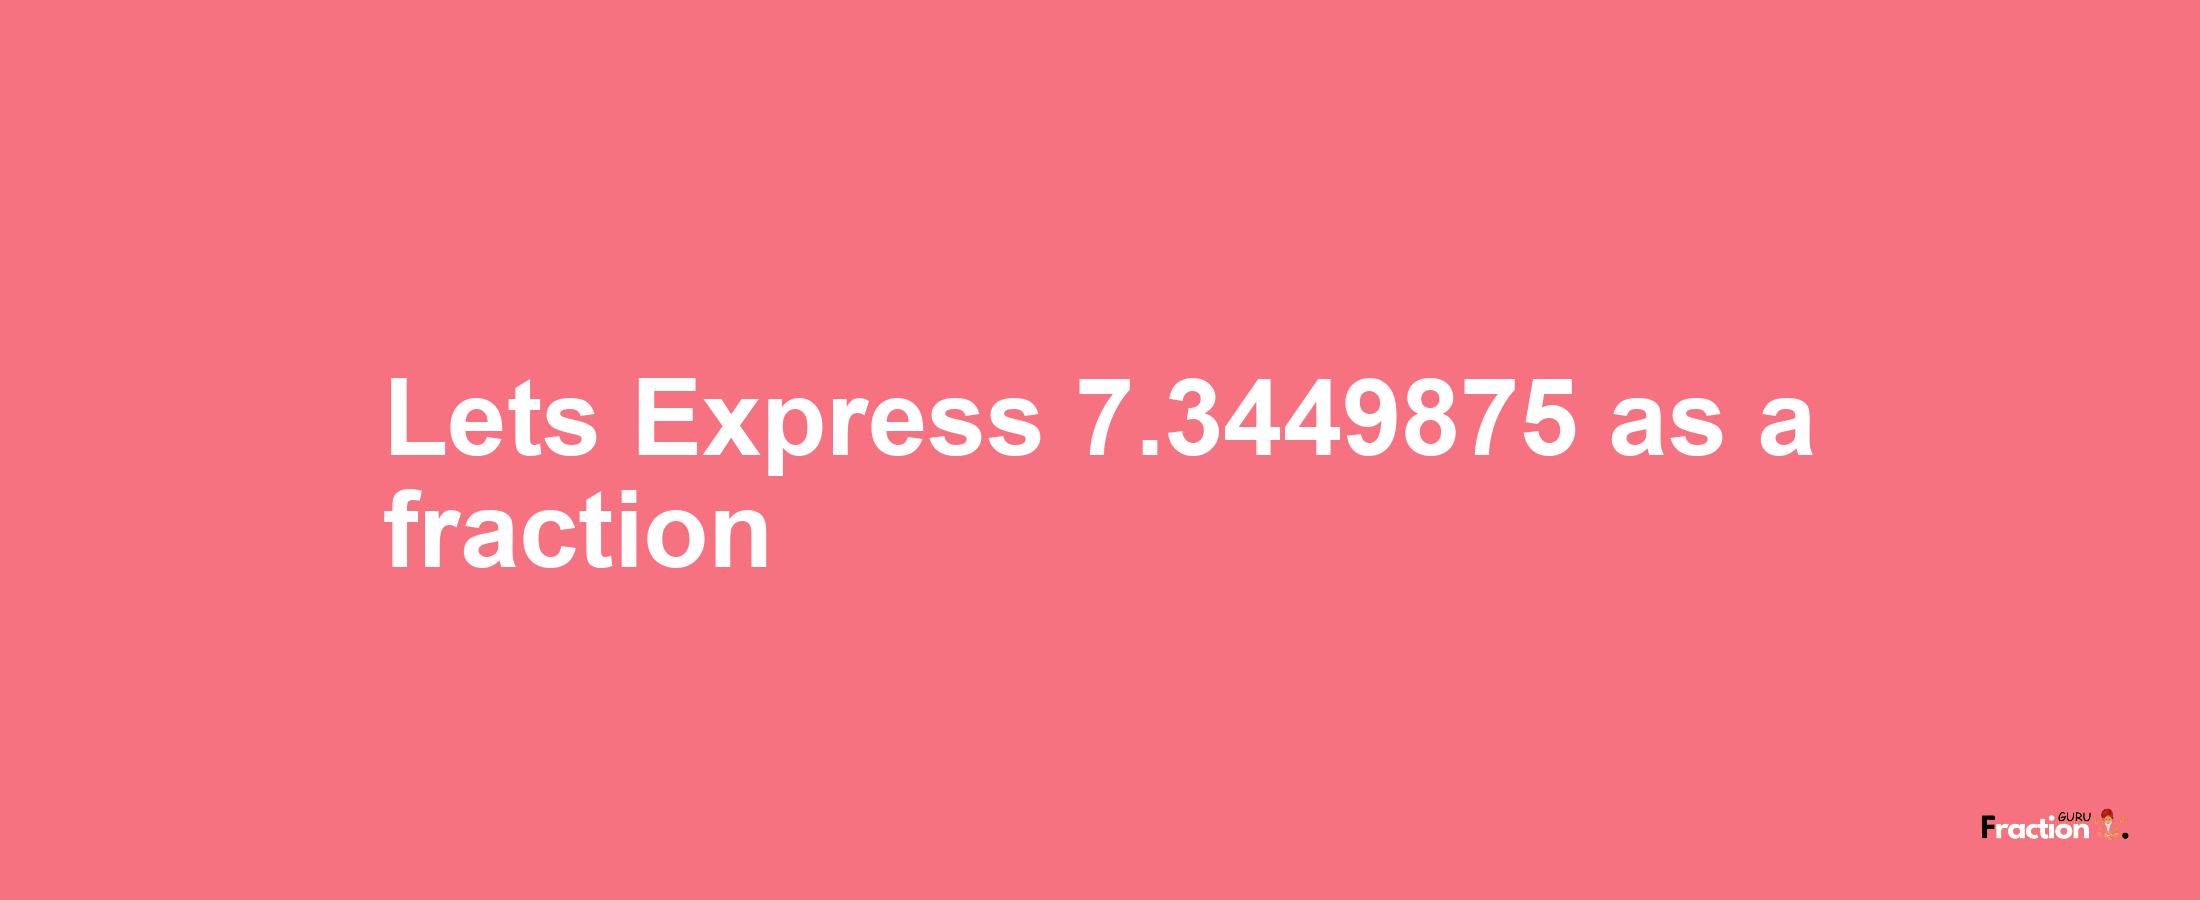 Lets Express 7.3449875 as afraction